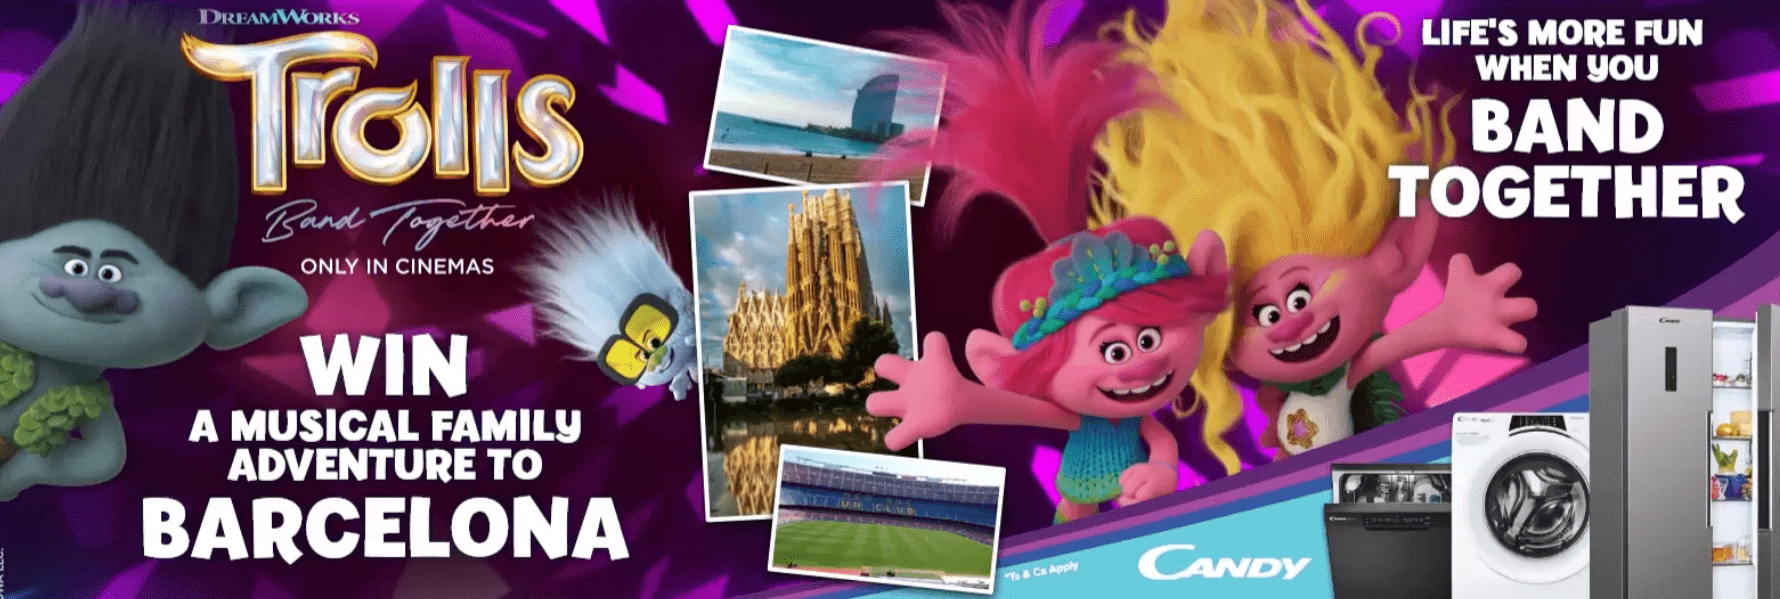 Trolls Band Together and Candy Competition: Win a trip to Barcelona